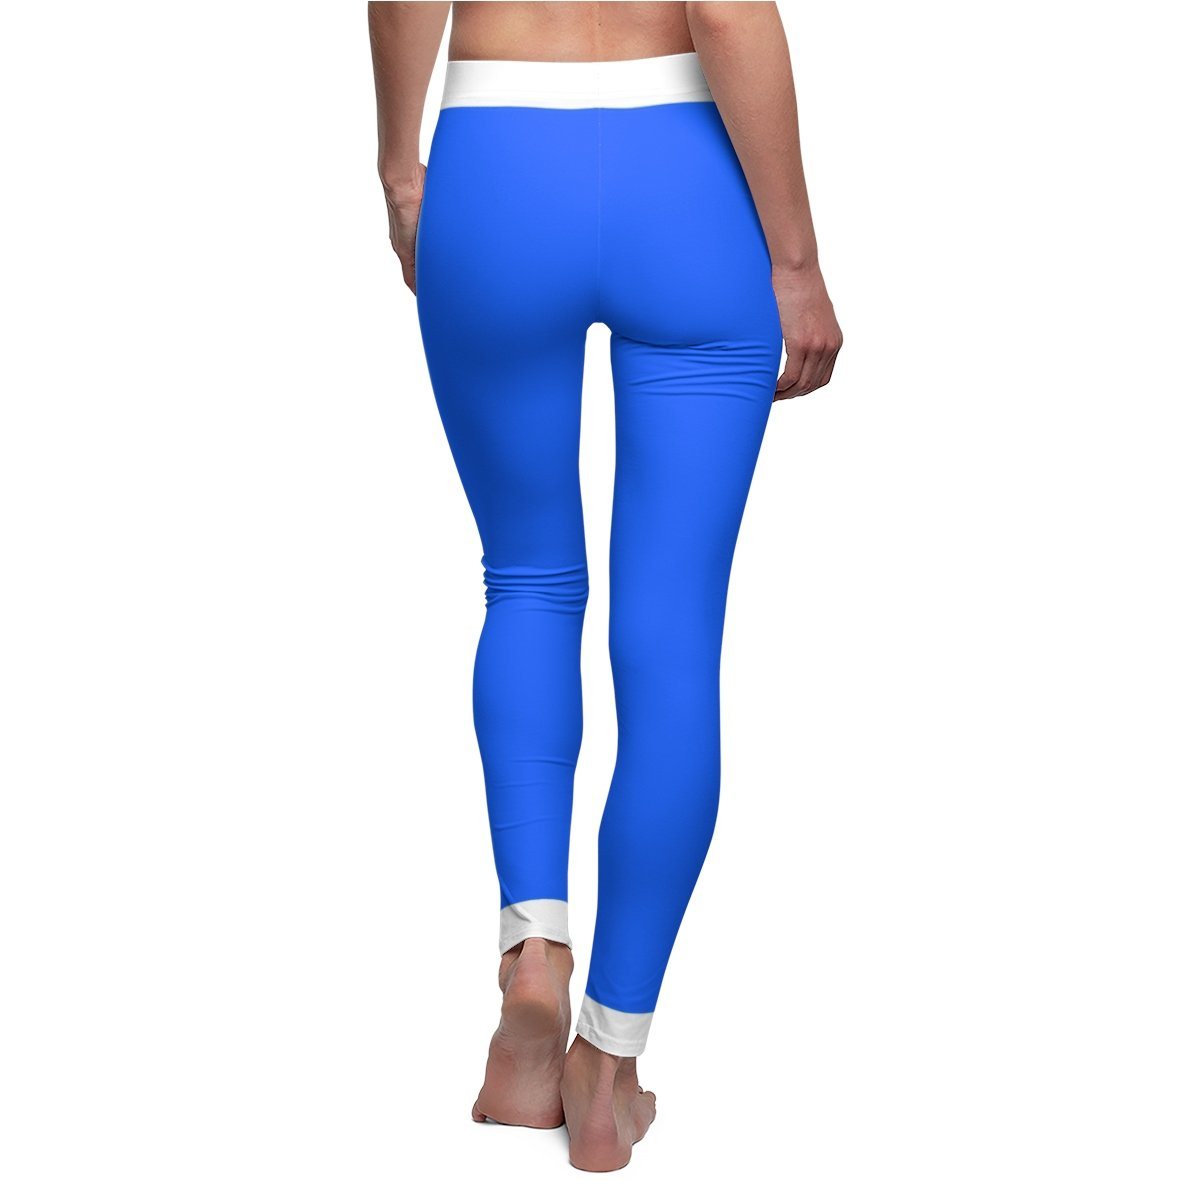 Spin - V.4 - Extreme Sportswear Cut & Sew Leggings Template-Photoshop Template - Photo Solutions